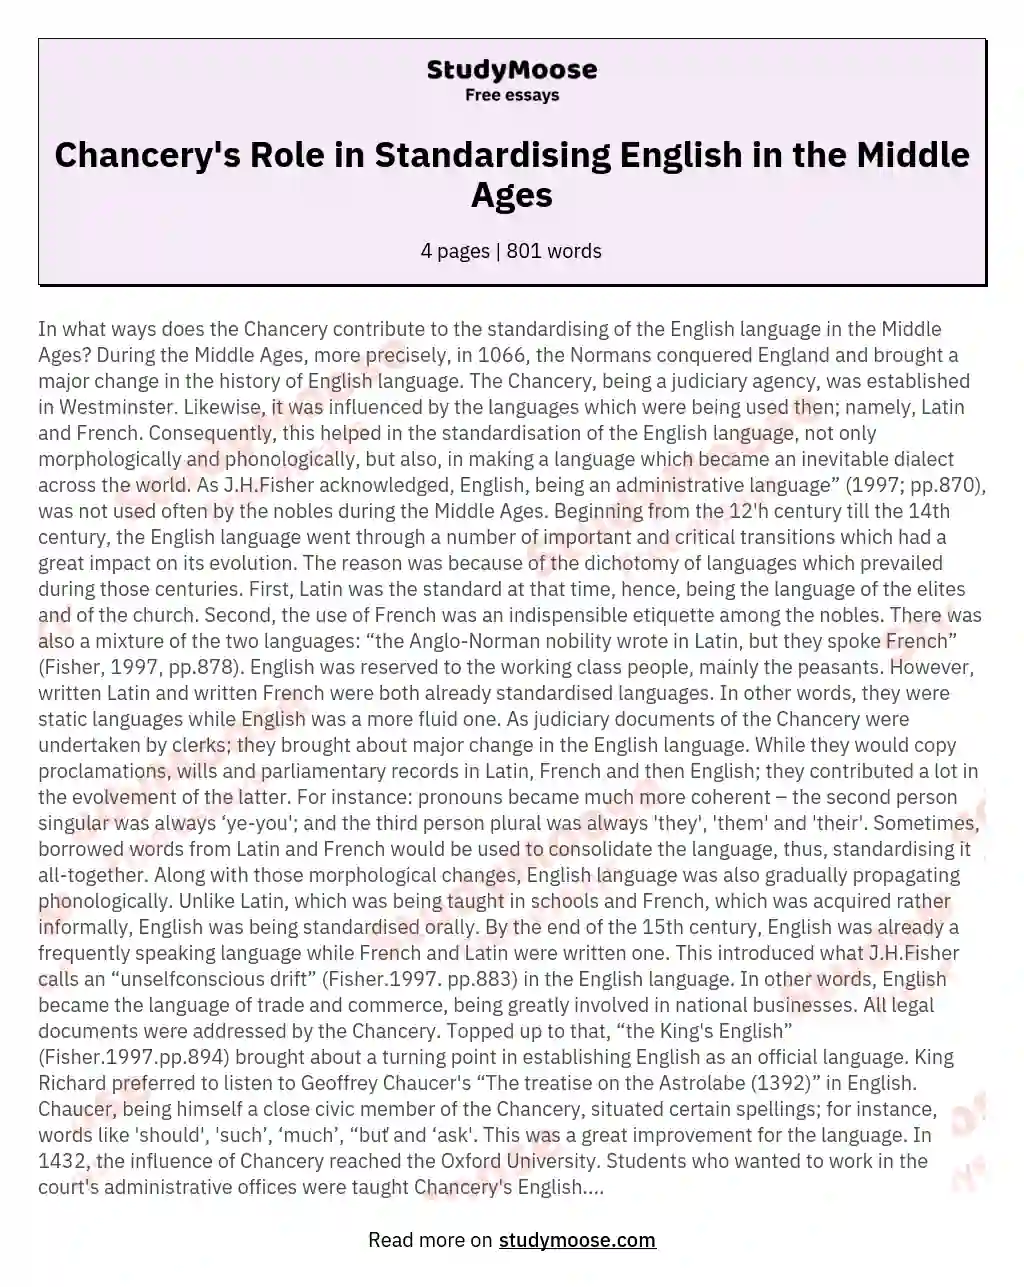 Chancery's Role in Standardising English in the Middle Ages essay